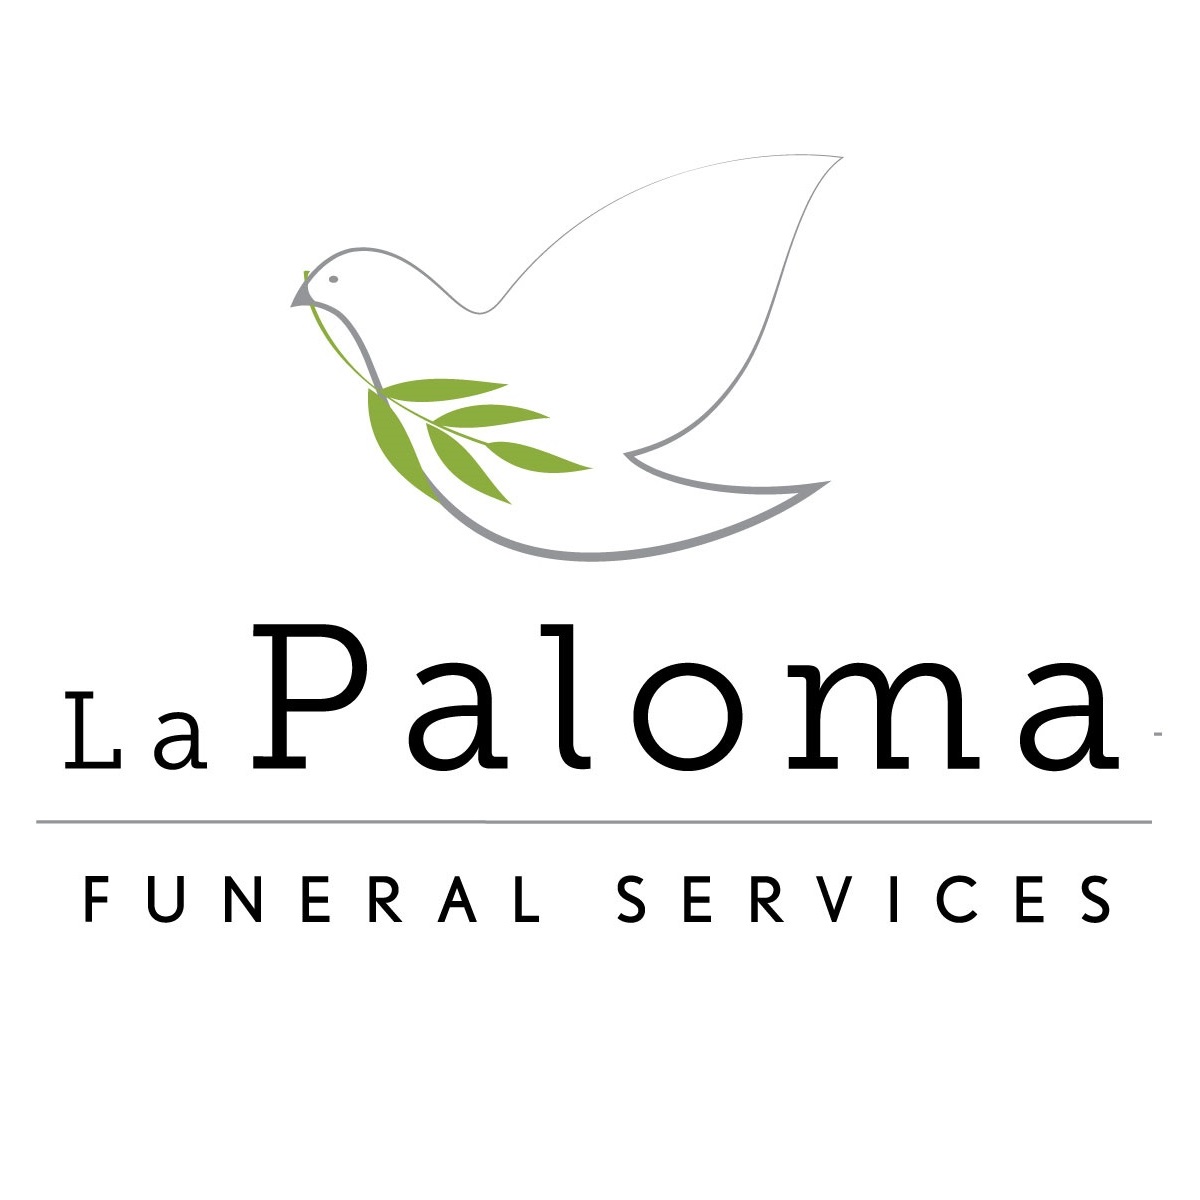 La Paloma Funeral Services | 2551 S Fort Apache Rd, Las Vegas, NV 89117, United States | Phone: (702) 935-7900